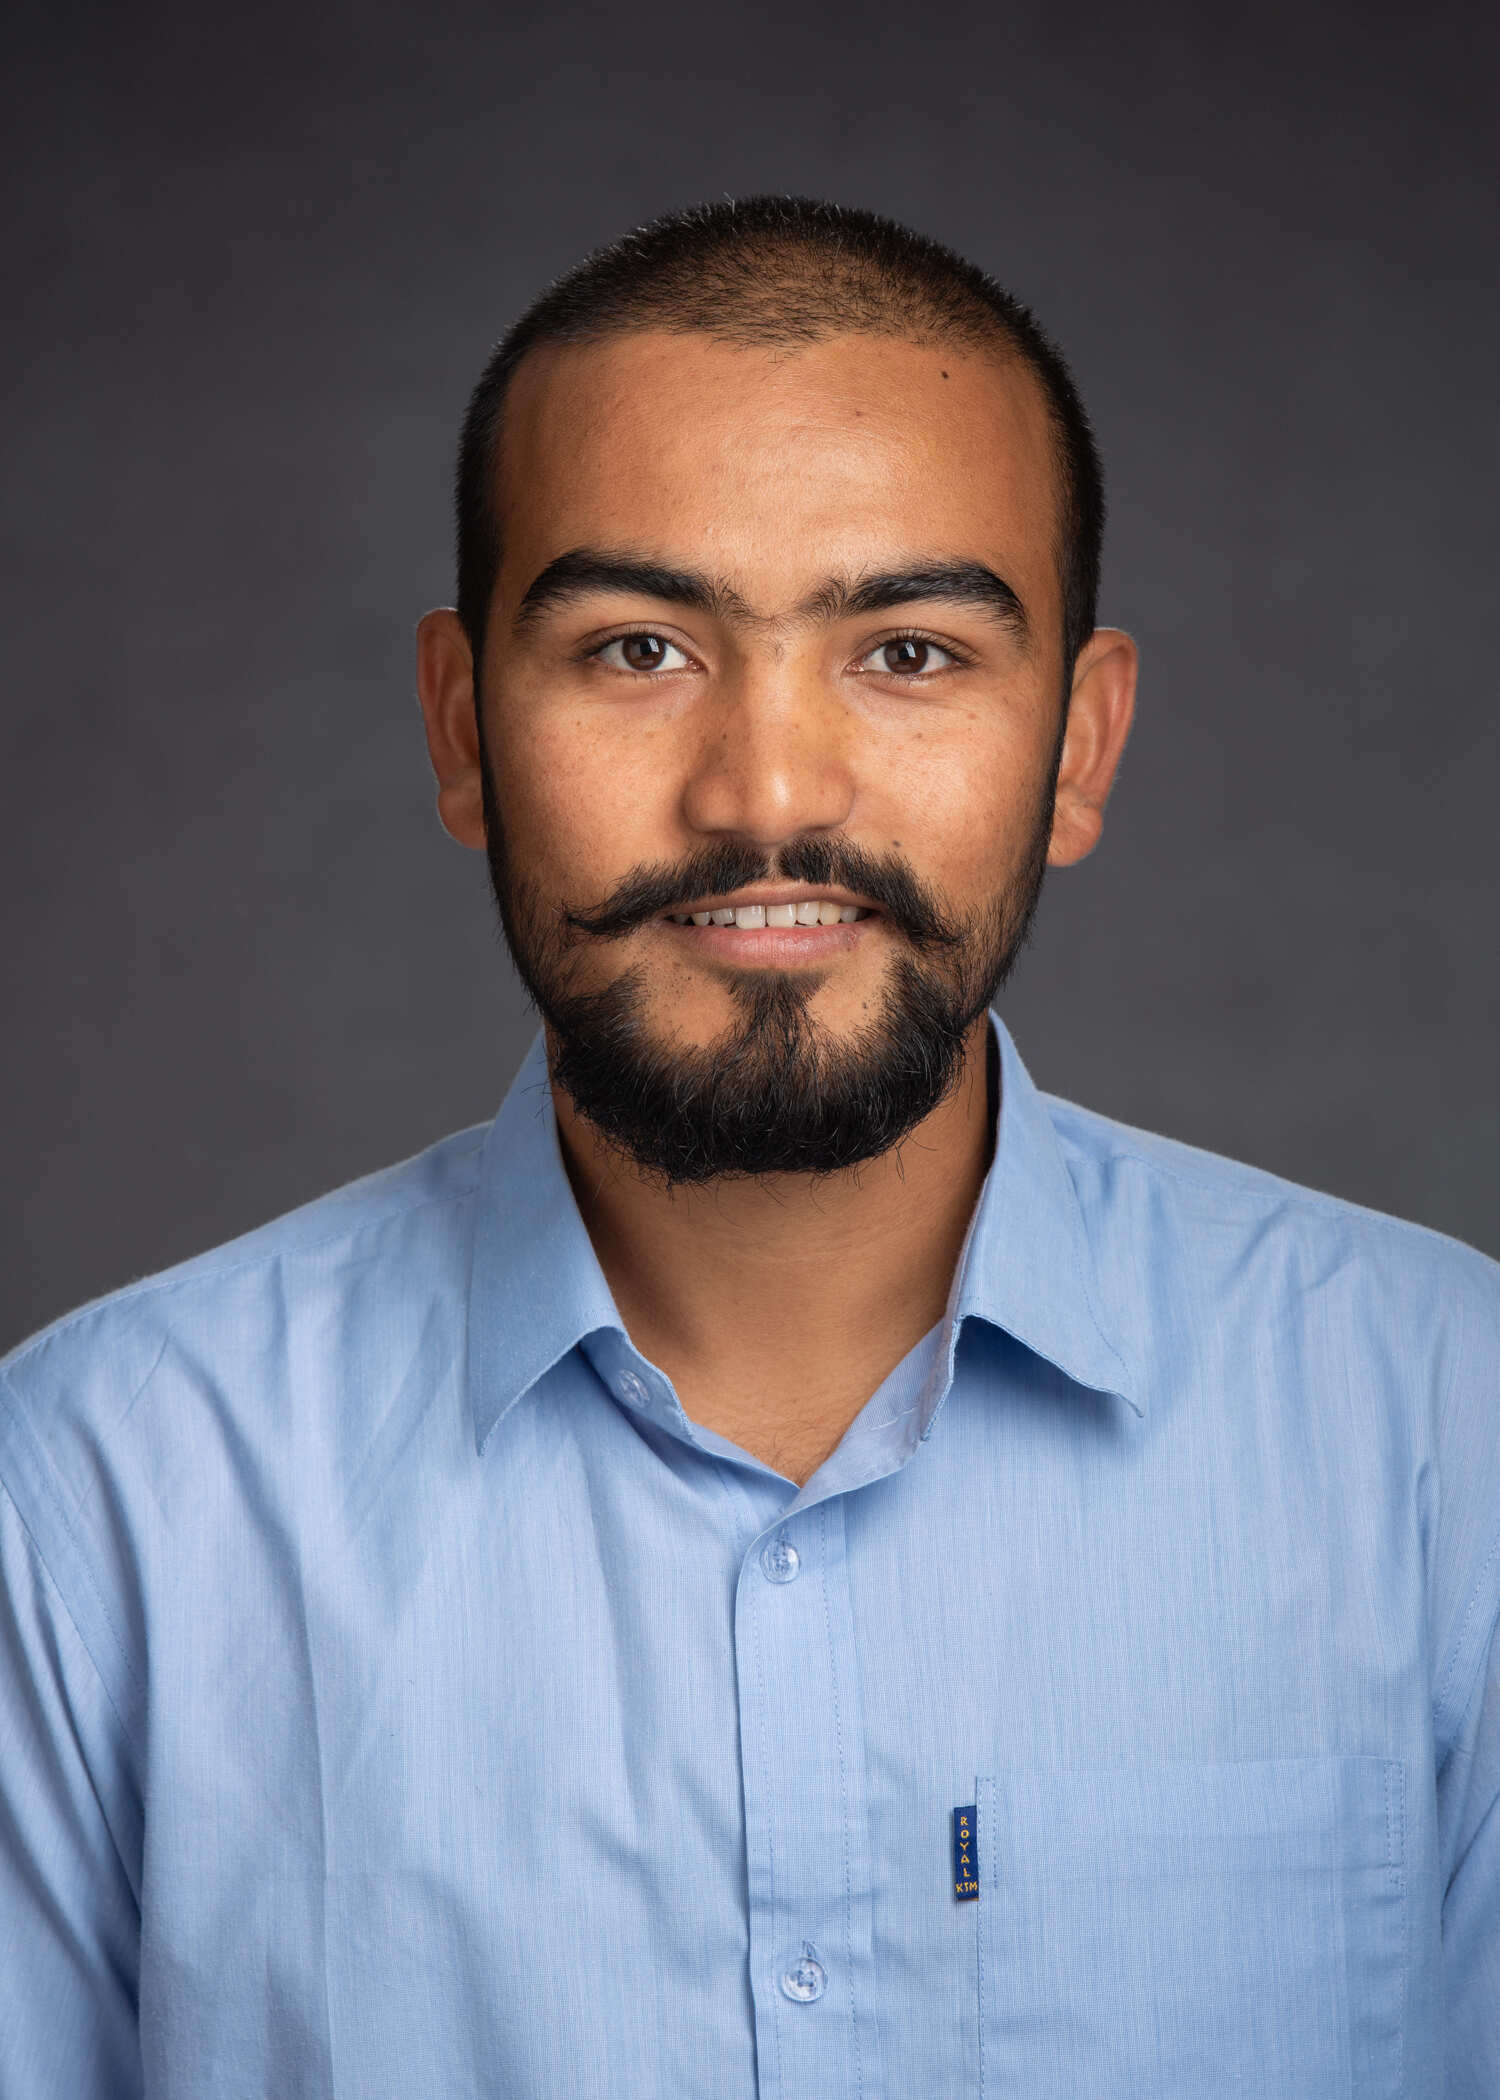 Bhanu Dangi, smiling, in a light blue shirt in front of a dark gray background.